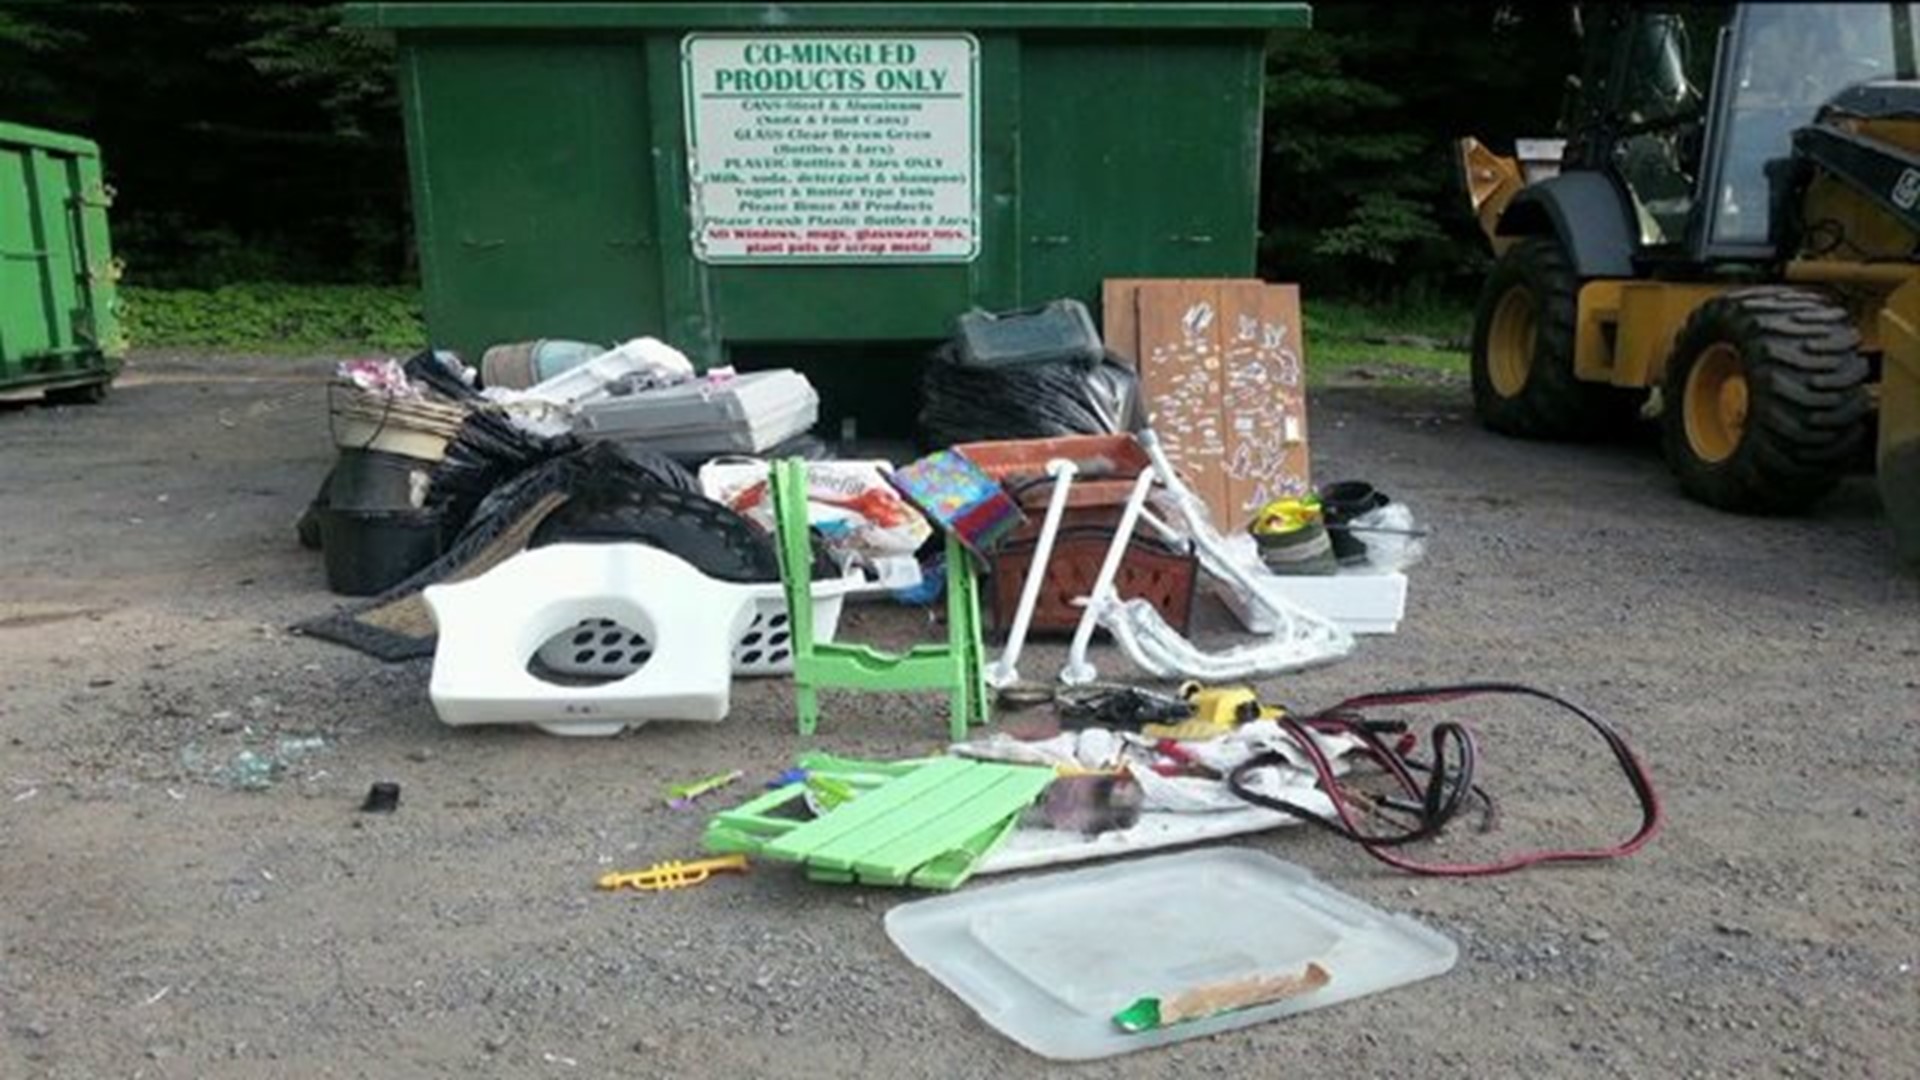 Illegal Dumping Impedes Recycling Program